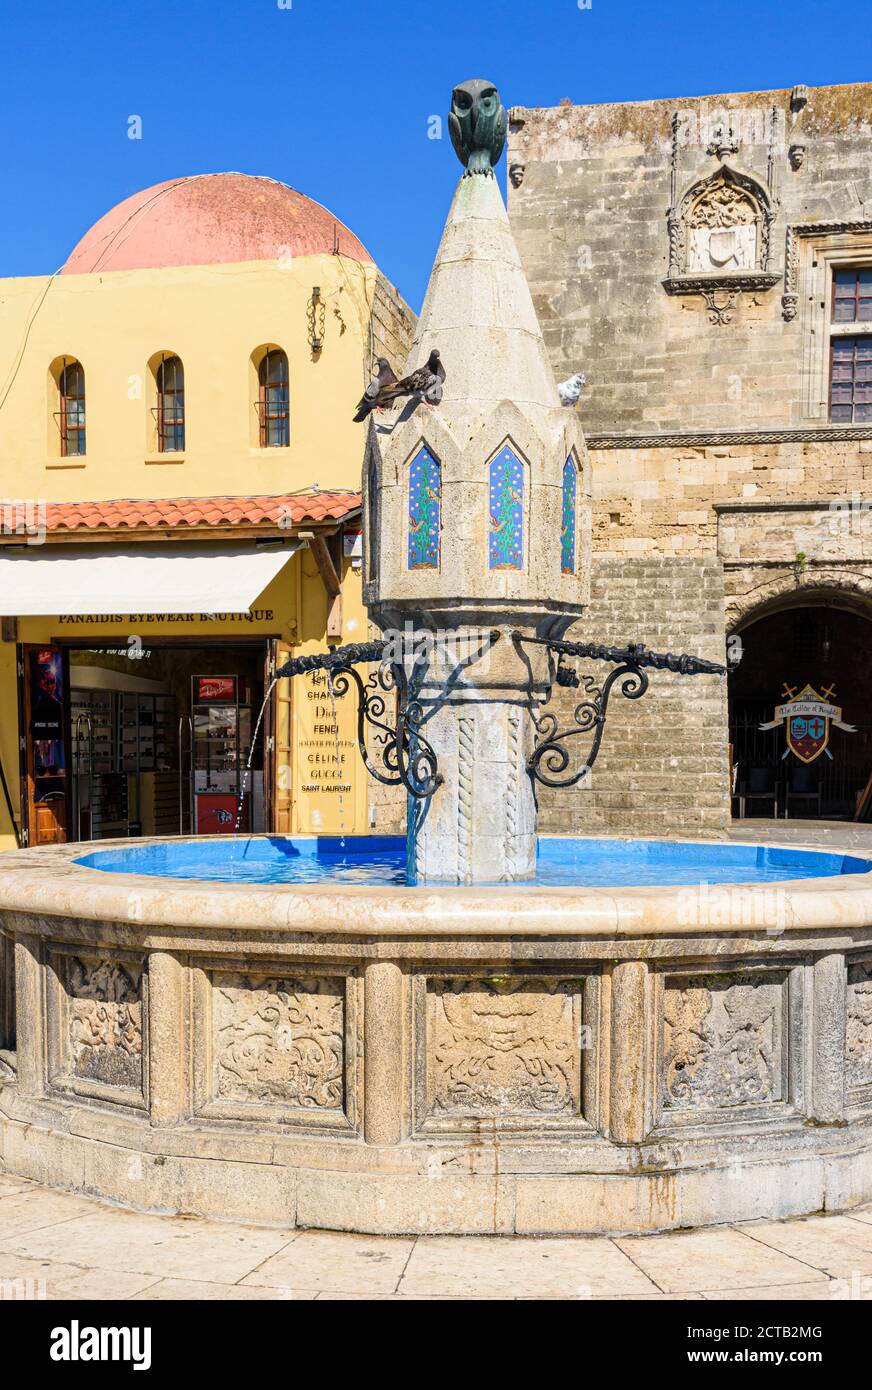 The Castellania fountain in Ippokratous Square, Rhodes, Old Town, Rhodes Island, Greece Stock Photo